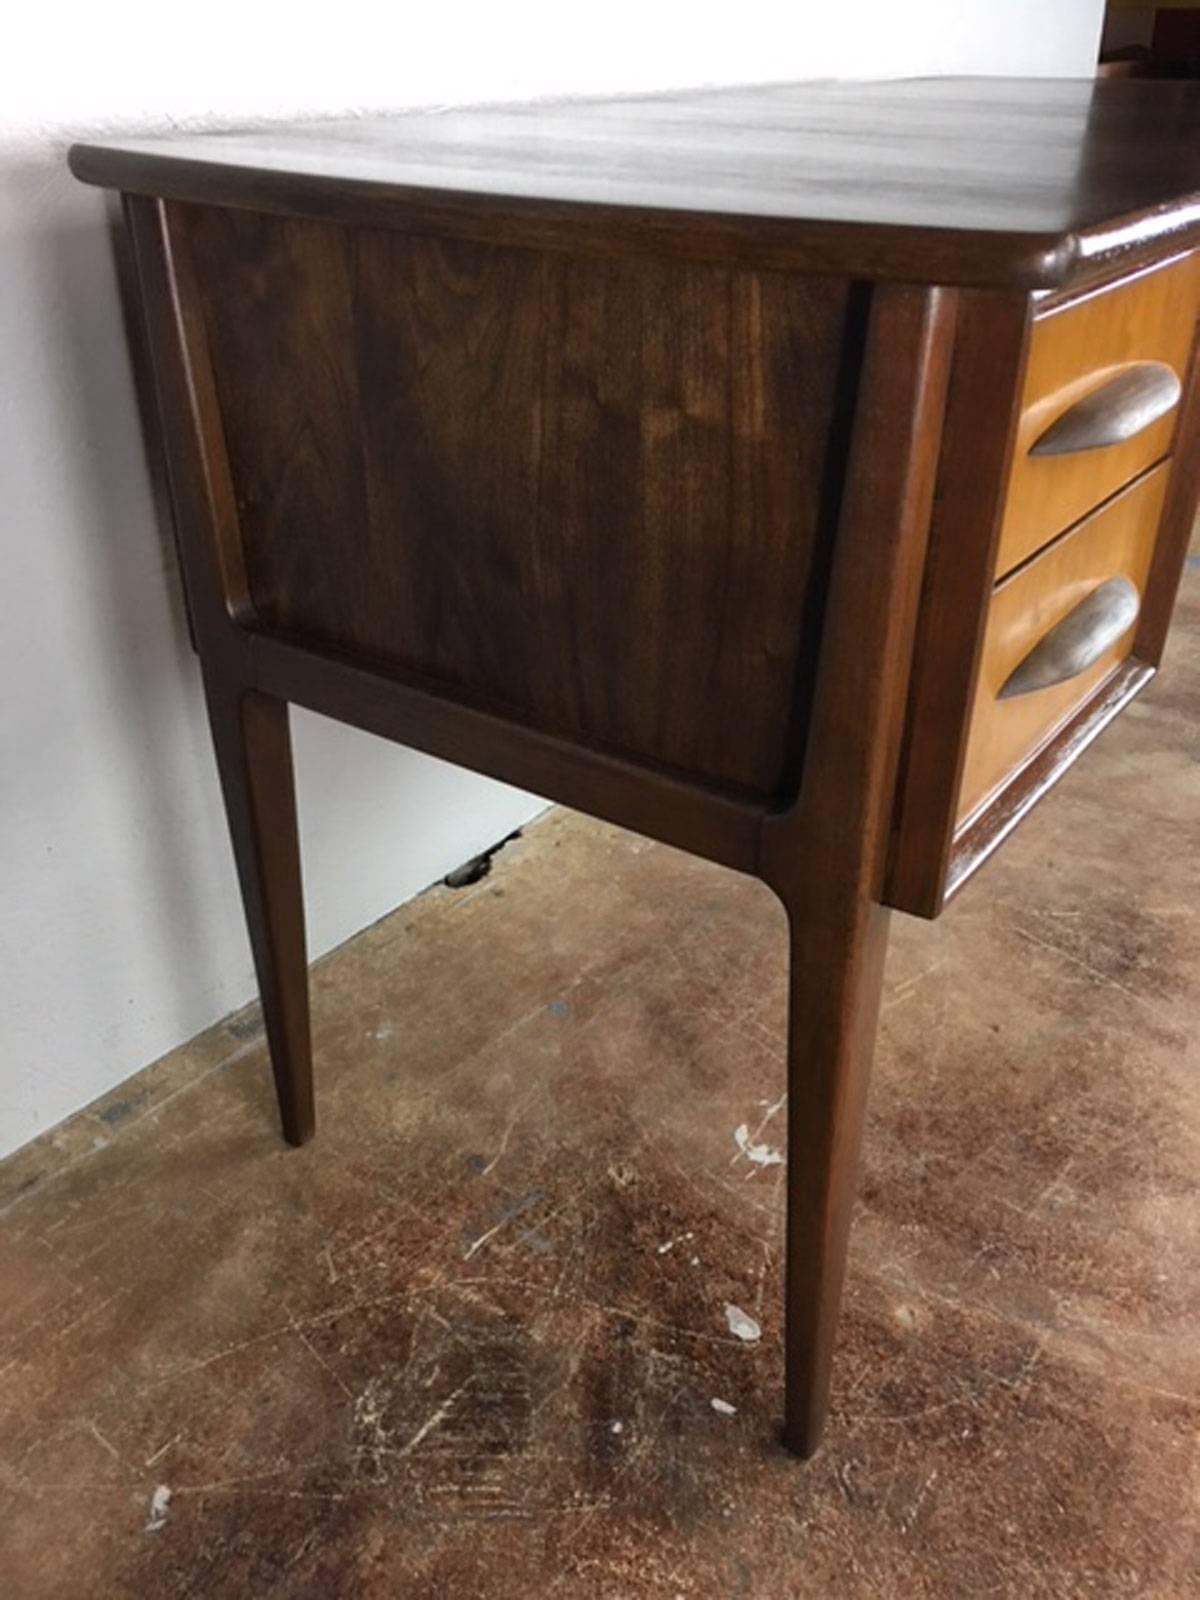 Unique Danish desk in pecan and walnut with external legs and frame. Note the curved wooden pull handles. Refinished and rich.